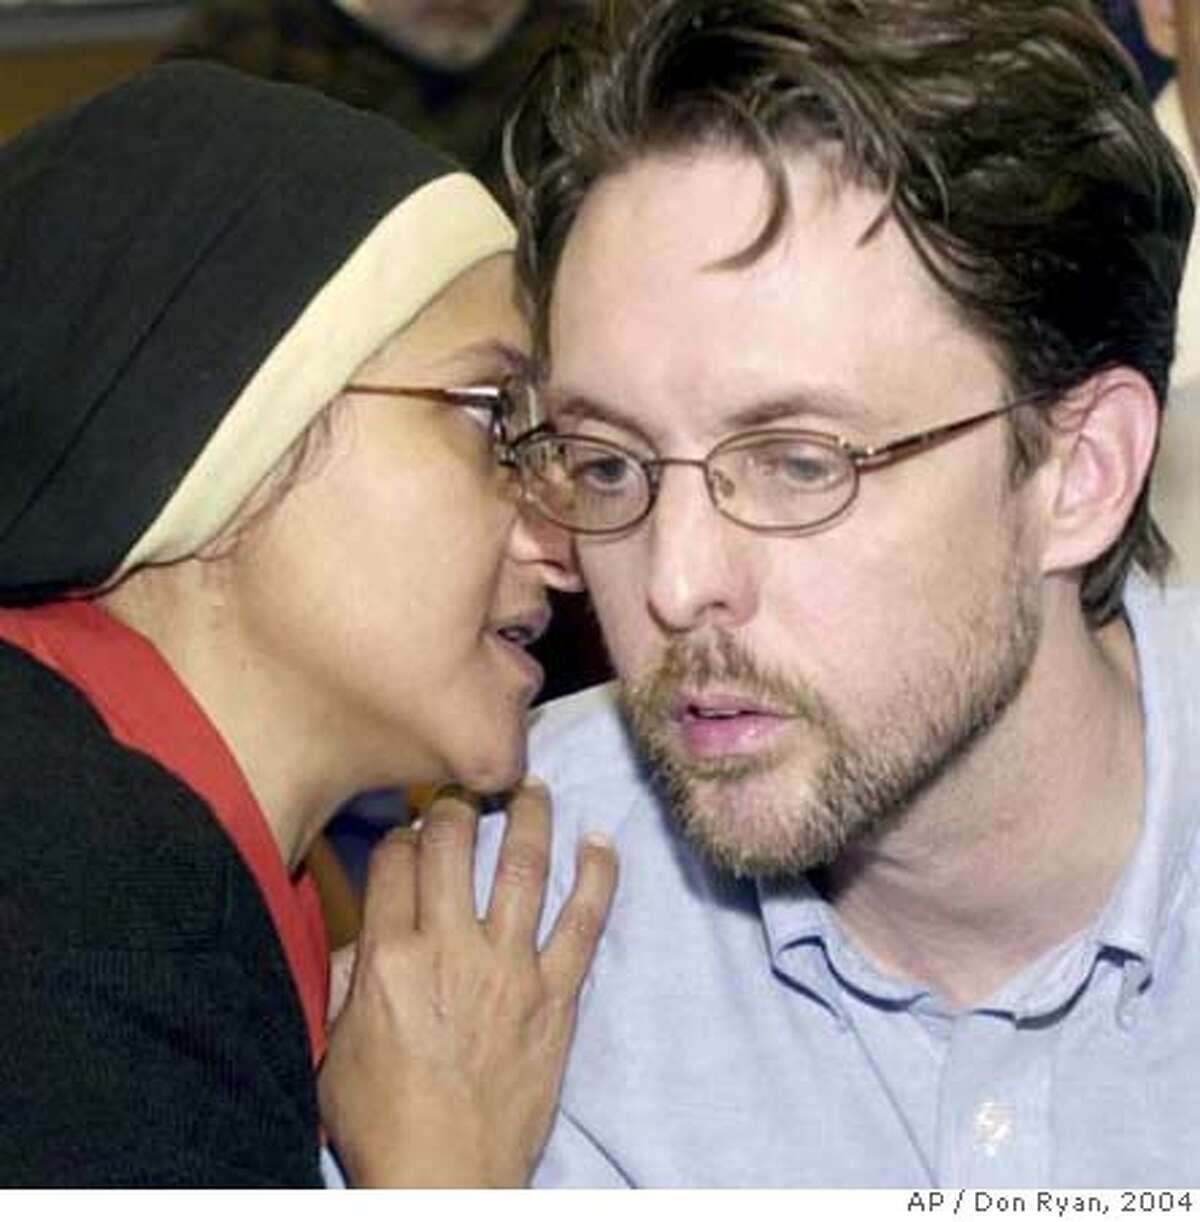 ** FILE ** Portland attorney Brandon Mayfield, right, confers with his wife, Mona Mayfield, during an announcement in Portland, Ore., in this May 24, 2004, file photo, that a federal judge dismissed the case against Mayfield in which he had been arrested in the Madrid train bombings investigation. U.S. District Judge Ann Aiken ruled in Eugene, Ore., Wednesday, Sept. 26, 2007, that the Foreign Intelligence Surveillance Act, as amended by the Patriot Act, "now permits the executive branch of government to conduct surveillance and searches of American citizens without satisfying the probable cause requirement of the Fourth Amendment." Mayfield had sued the federal government after he was mistakenly linked to the 2004 Madrid train bombings. (AP Photo/Don Ryan)